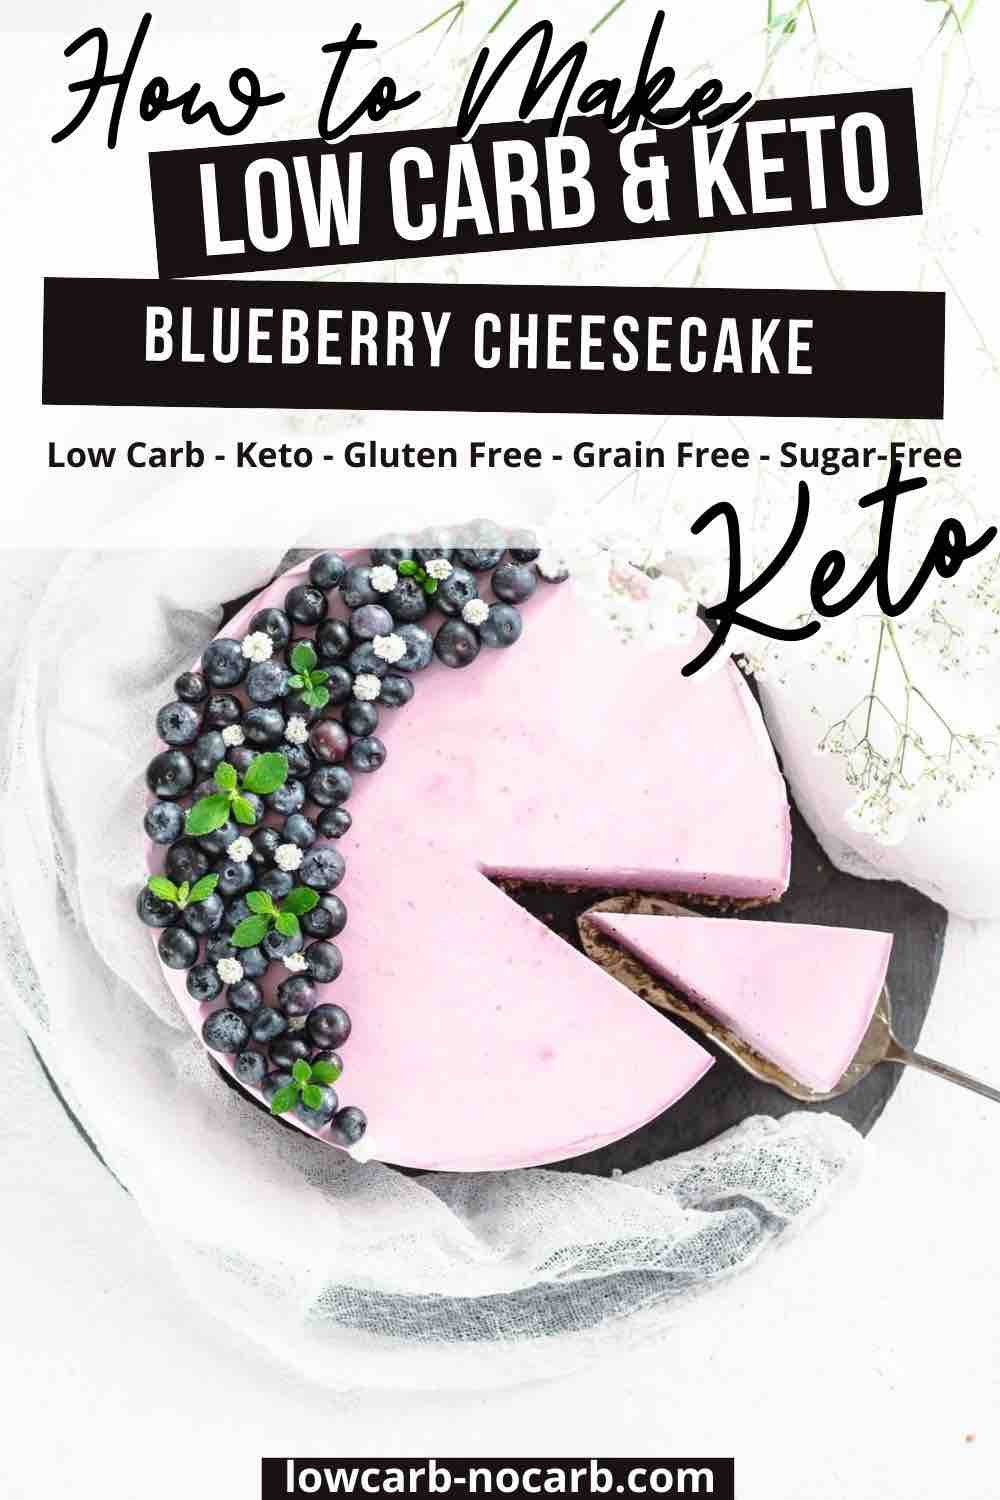 Keto Cheesecake with piece of cake on the side.